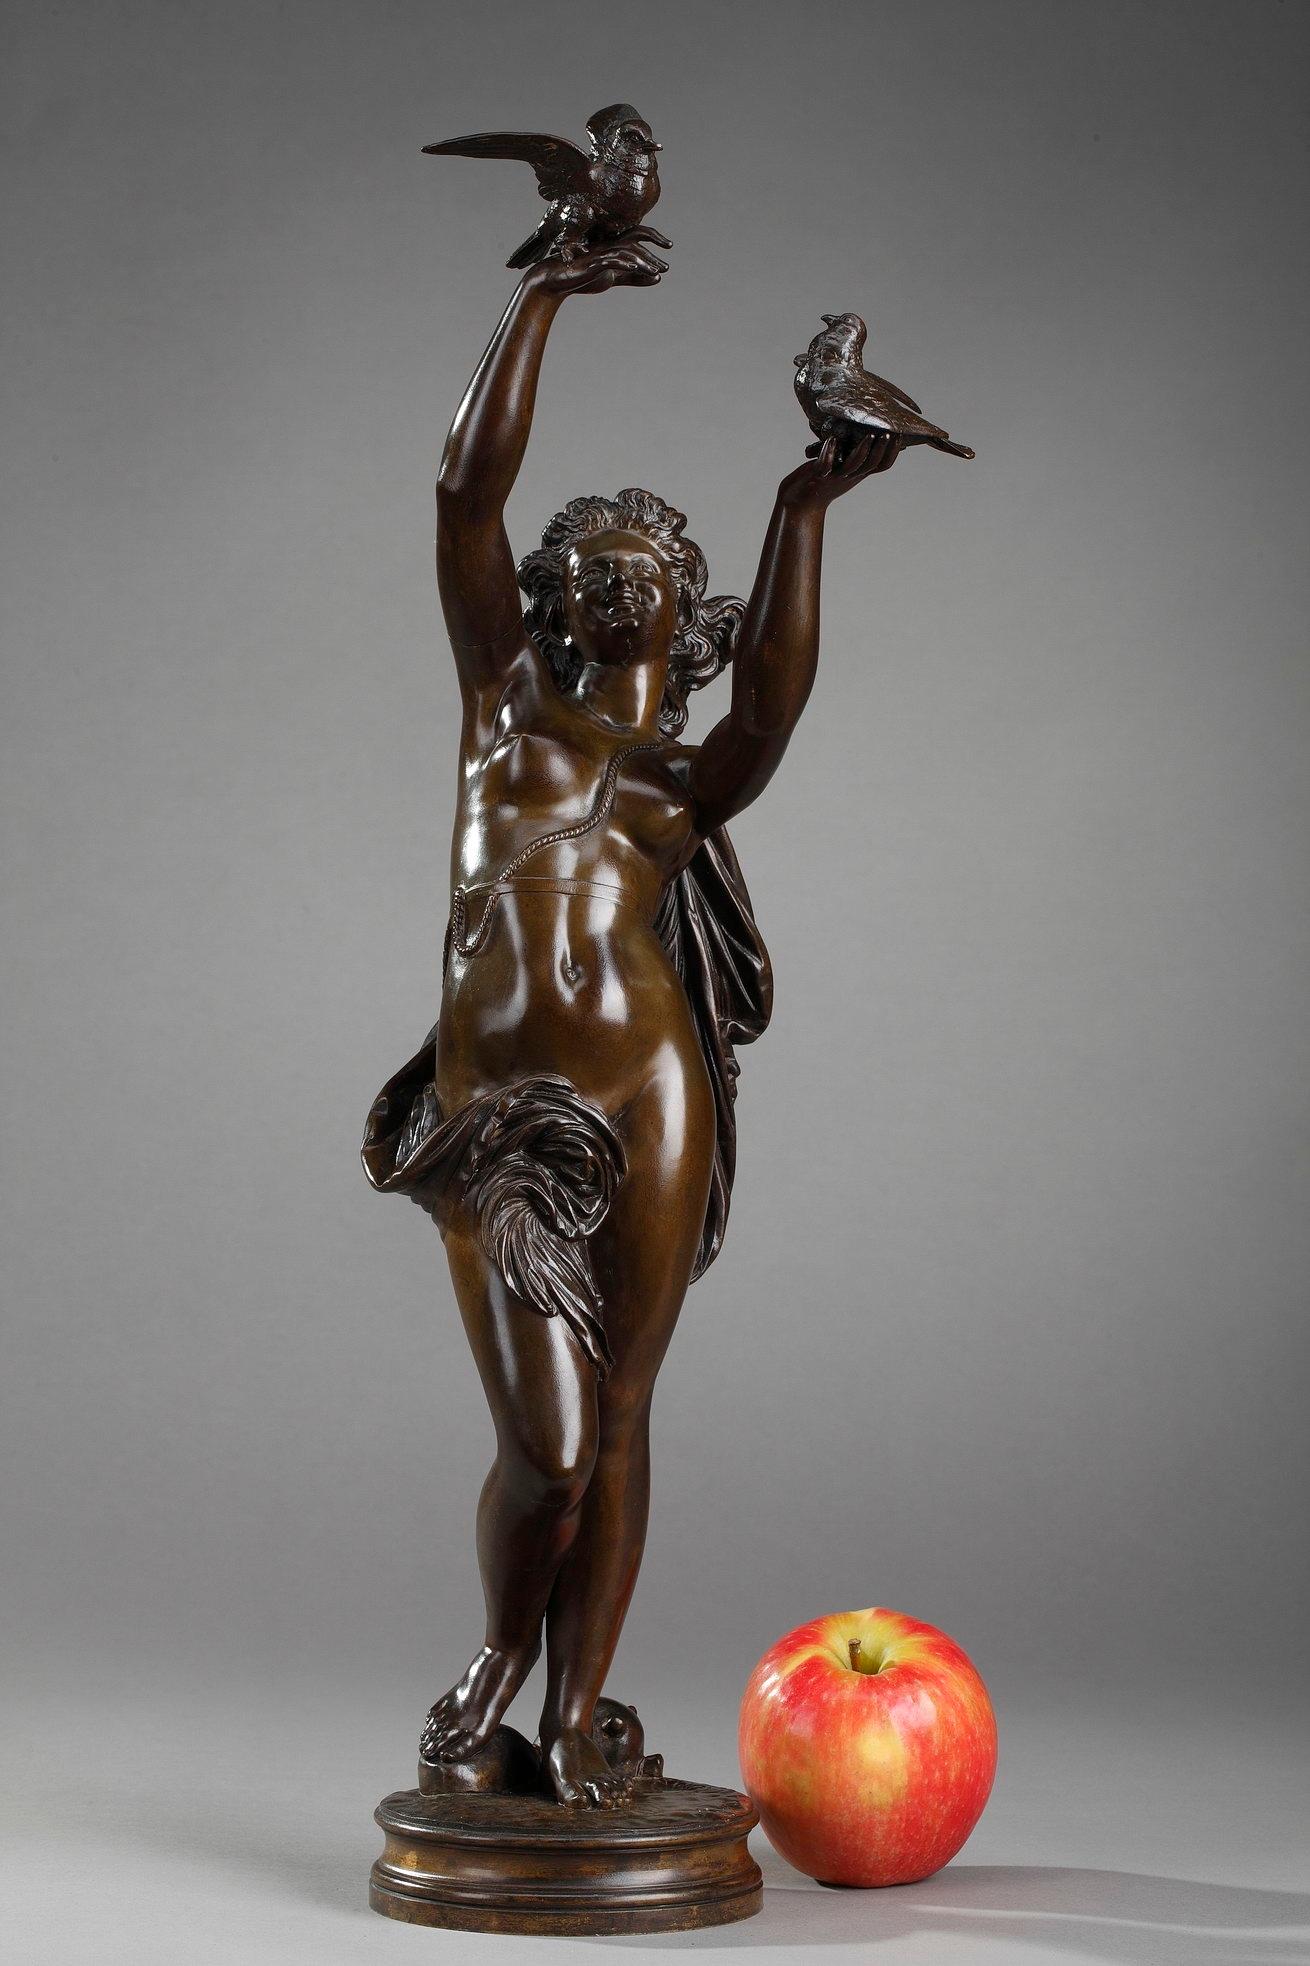 Bronze sculpture with brown patina by Charles-Alphonse Gumery, featuring a smiling young woman with doves. This bronze statuette is signed: Gumery ROME. Charles Gumery most probably made this bronze during his stay at the Villa Medici in